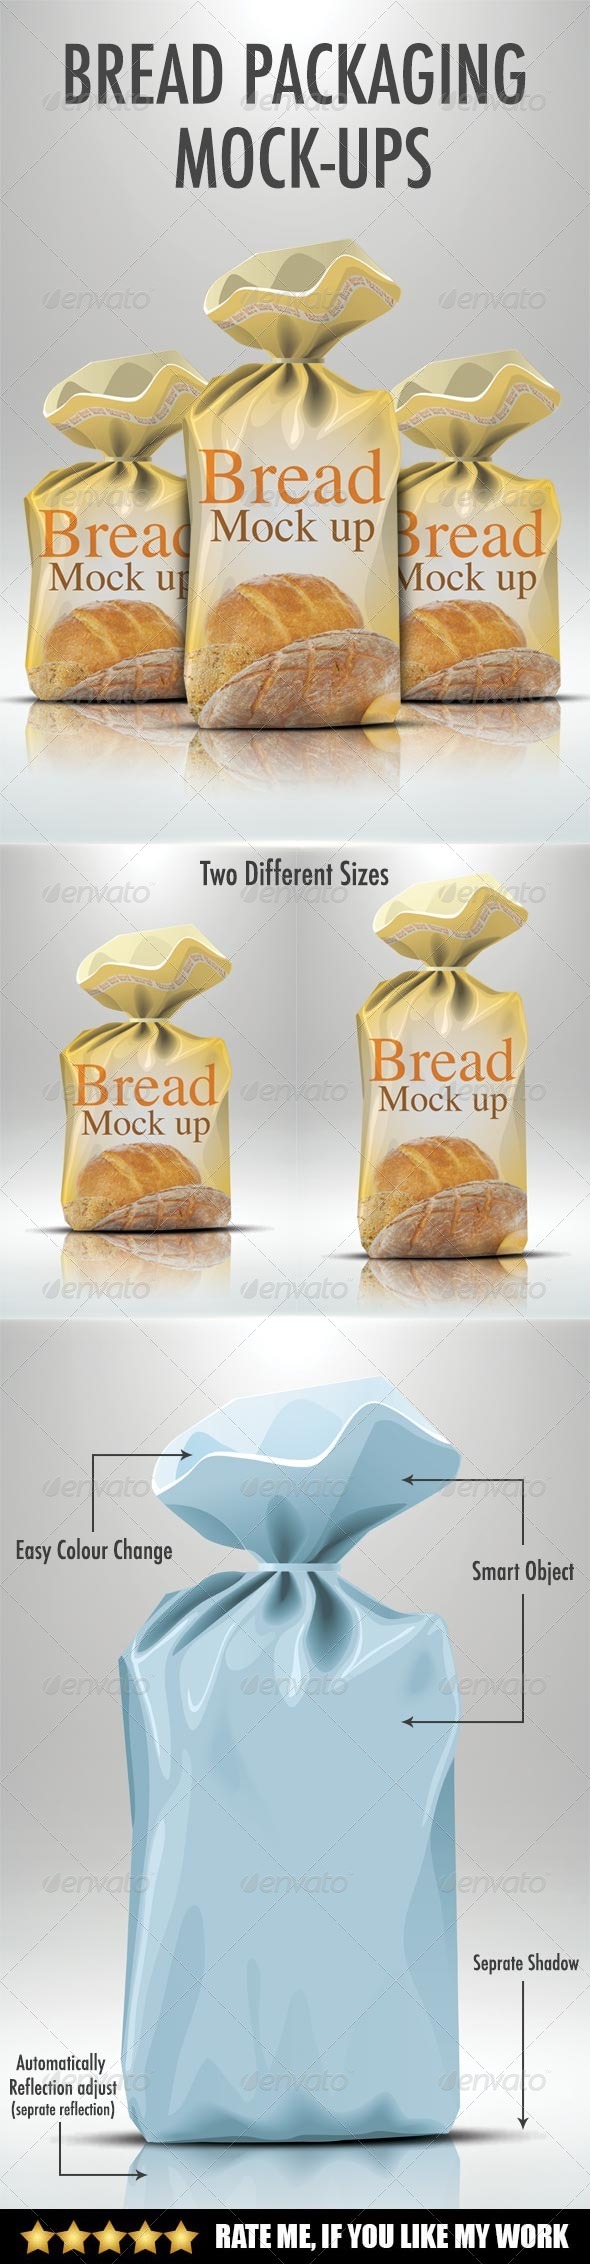 Bread packaging mock-up by Artsignz | GraphicRiver